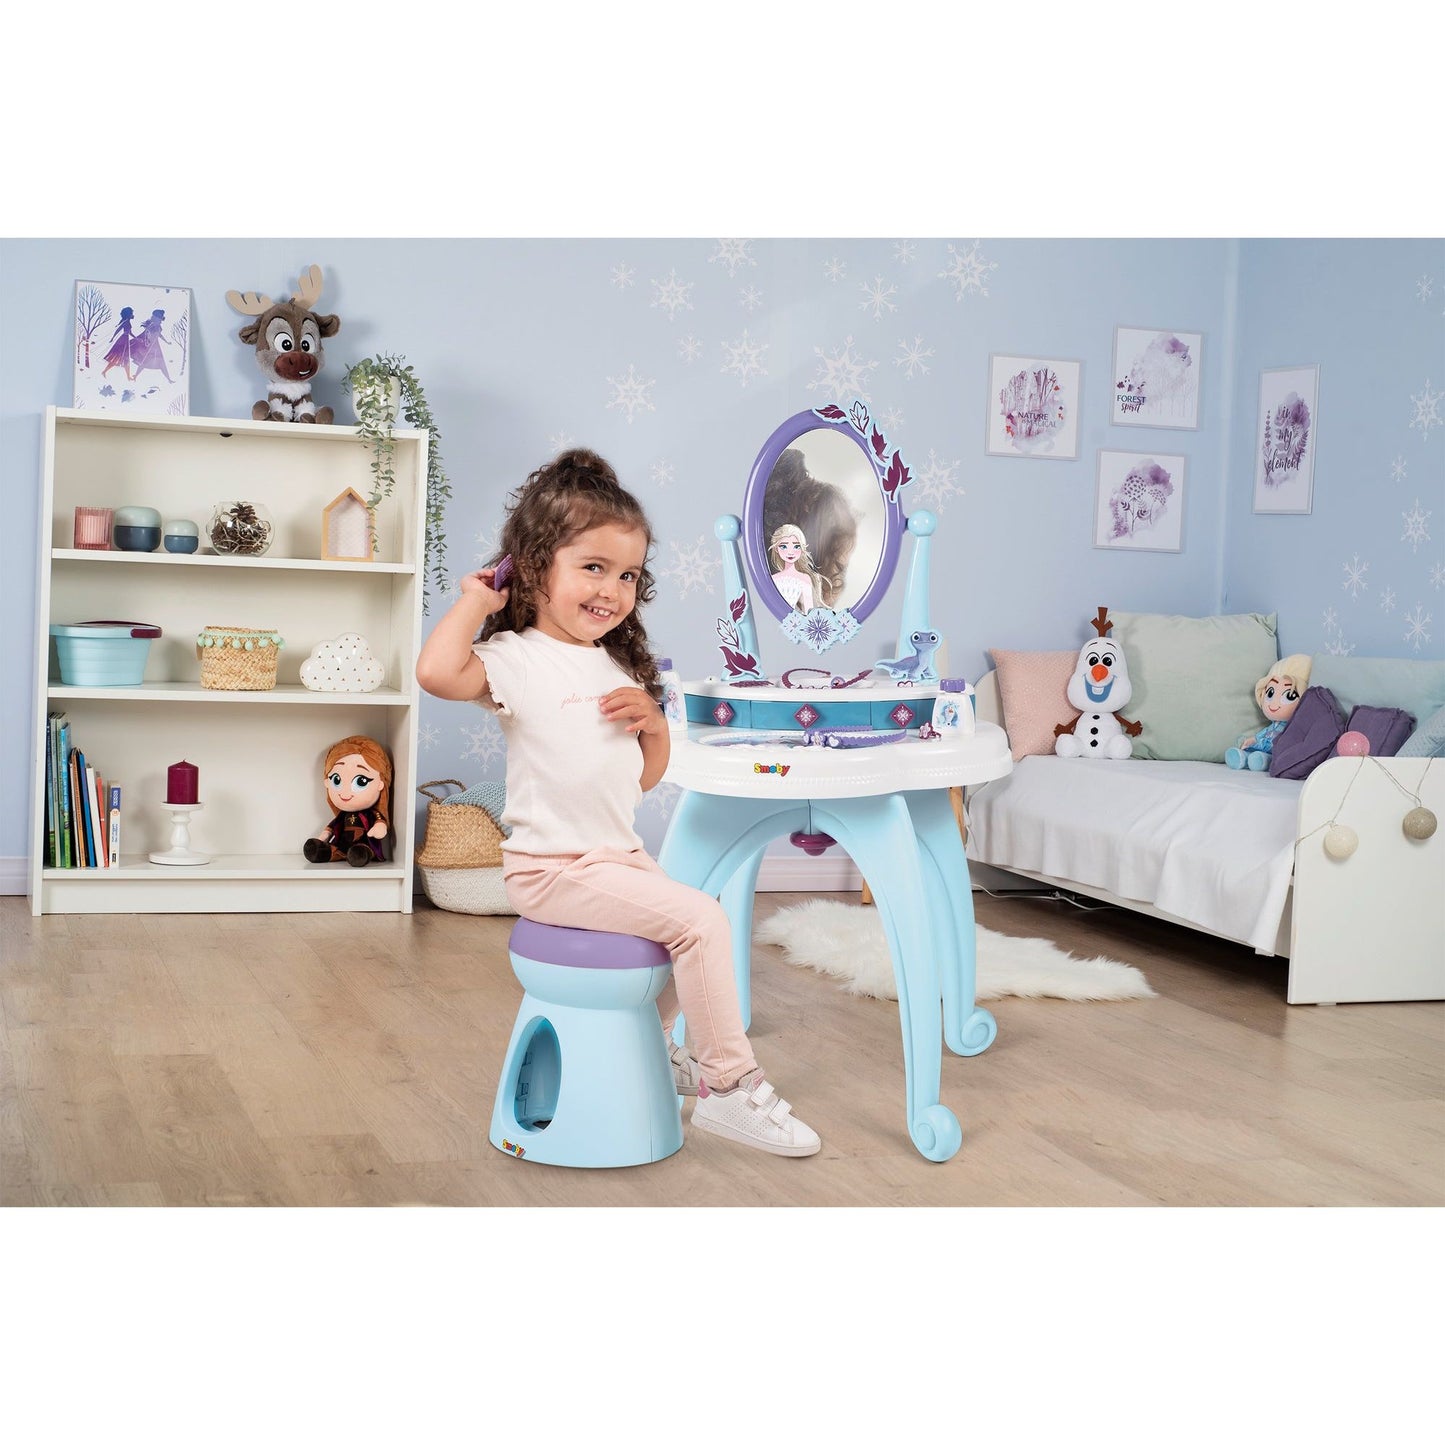 Smoby Frozen 2in1 Dressing Table - 3 Years +